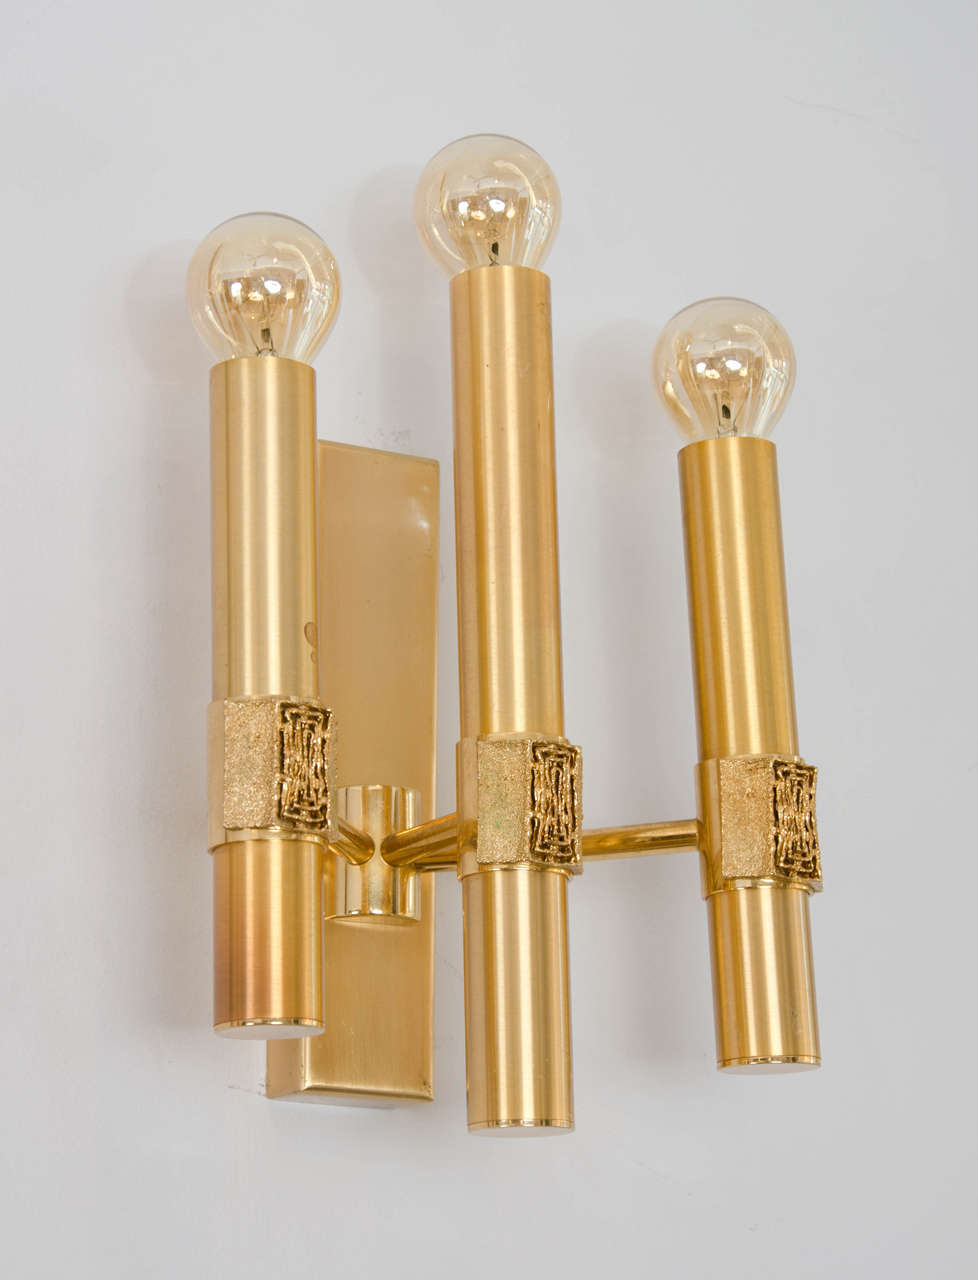 Cast Pair of Brass Wall Sconces by of Angelo Brotto for Esperia, 1970s For Sale